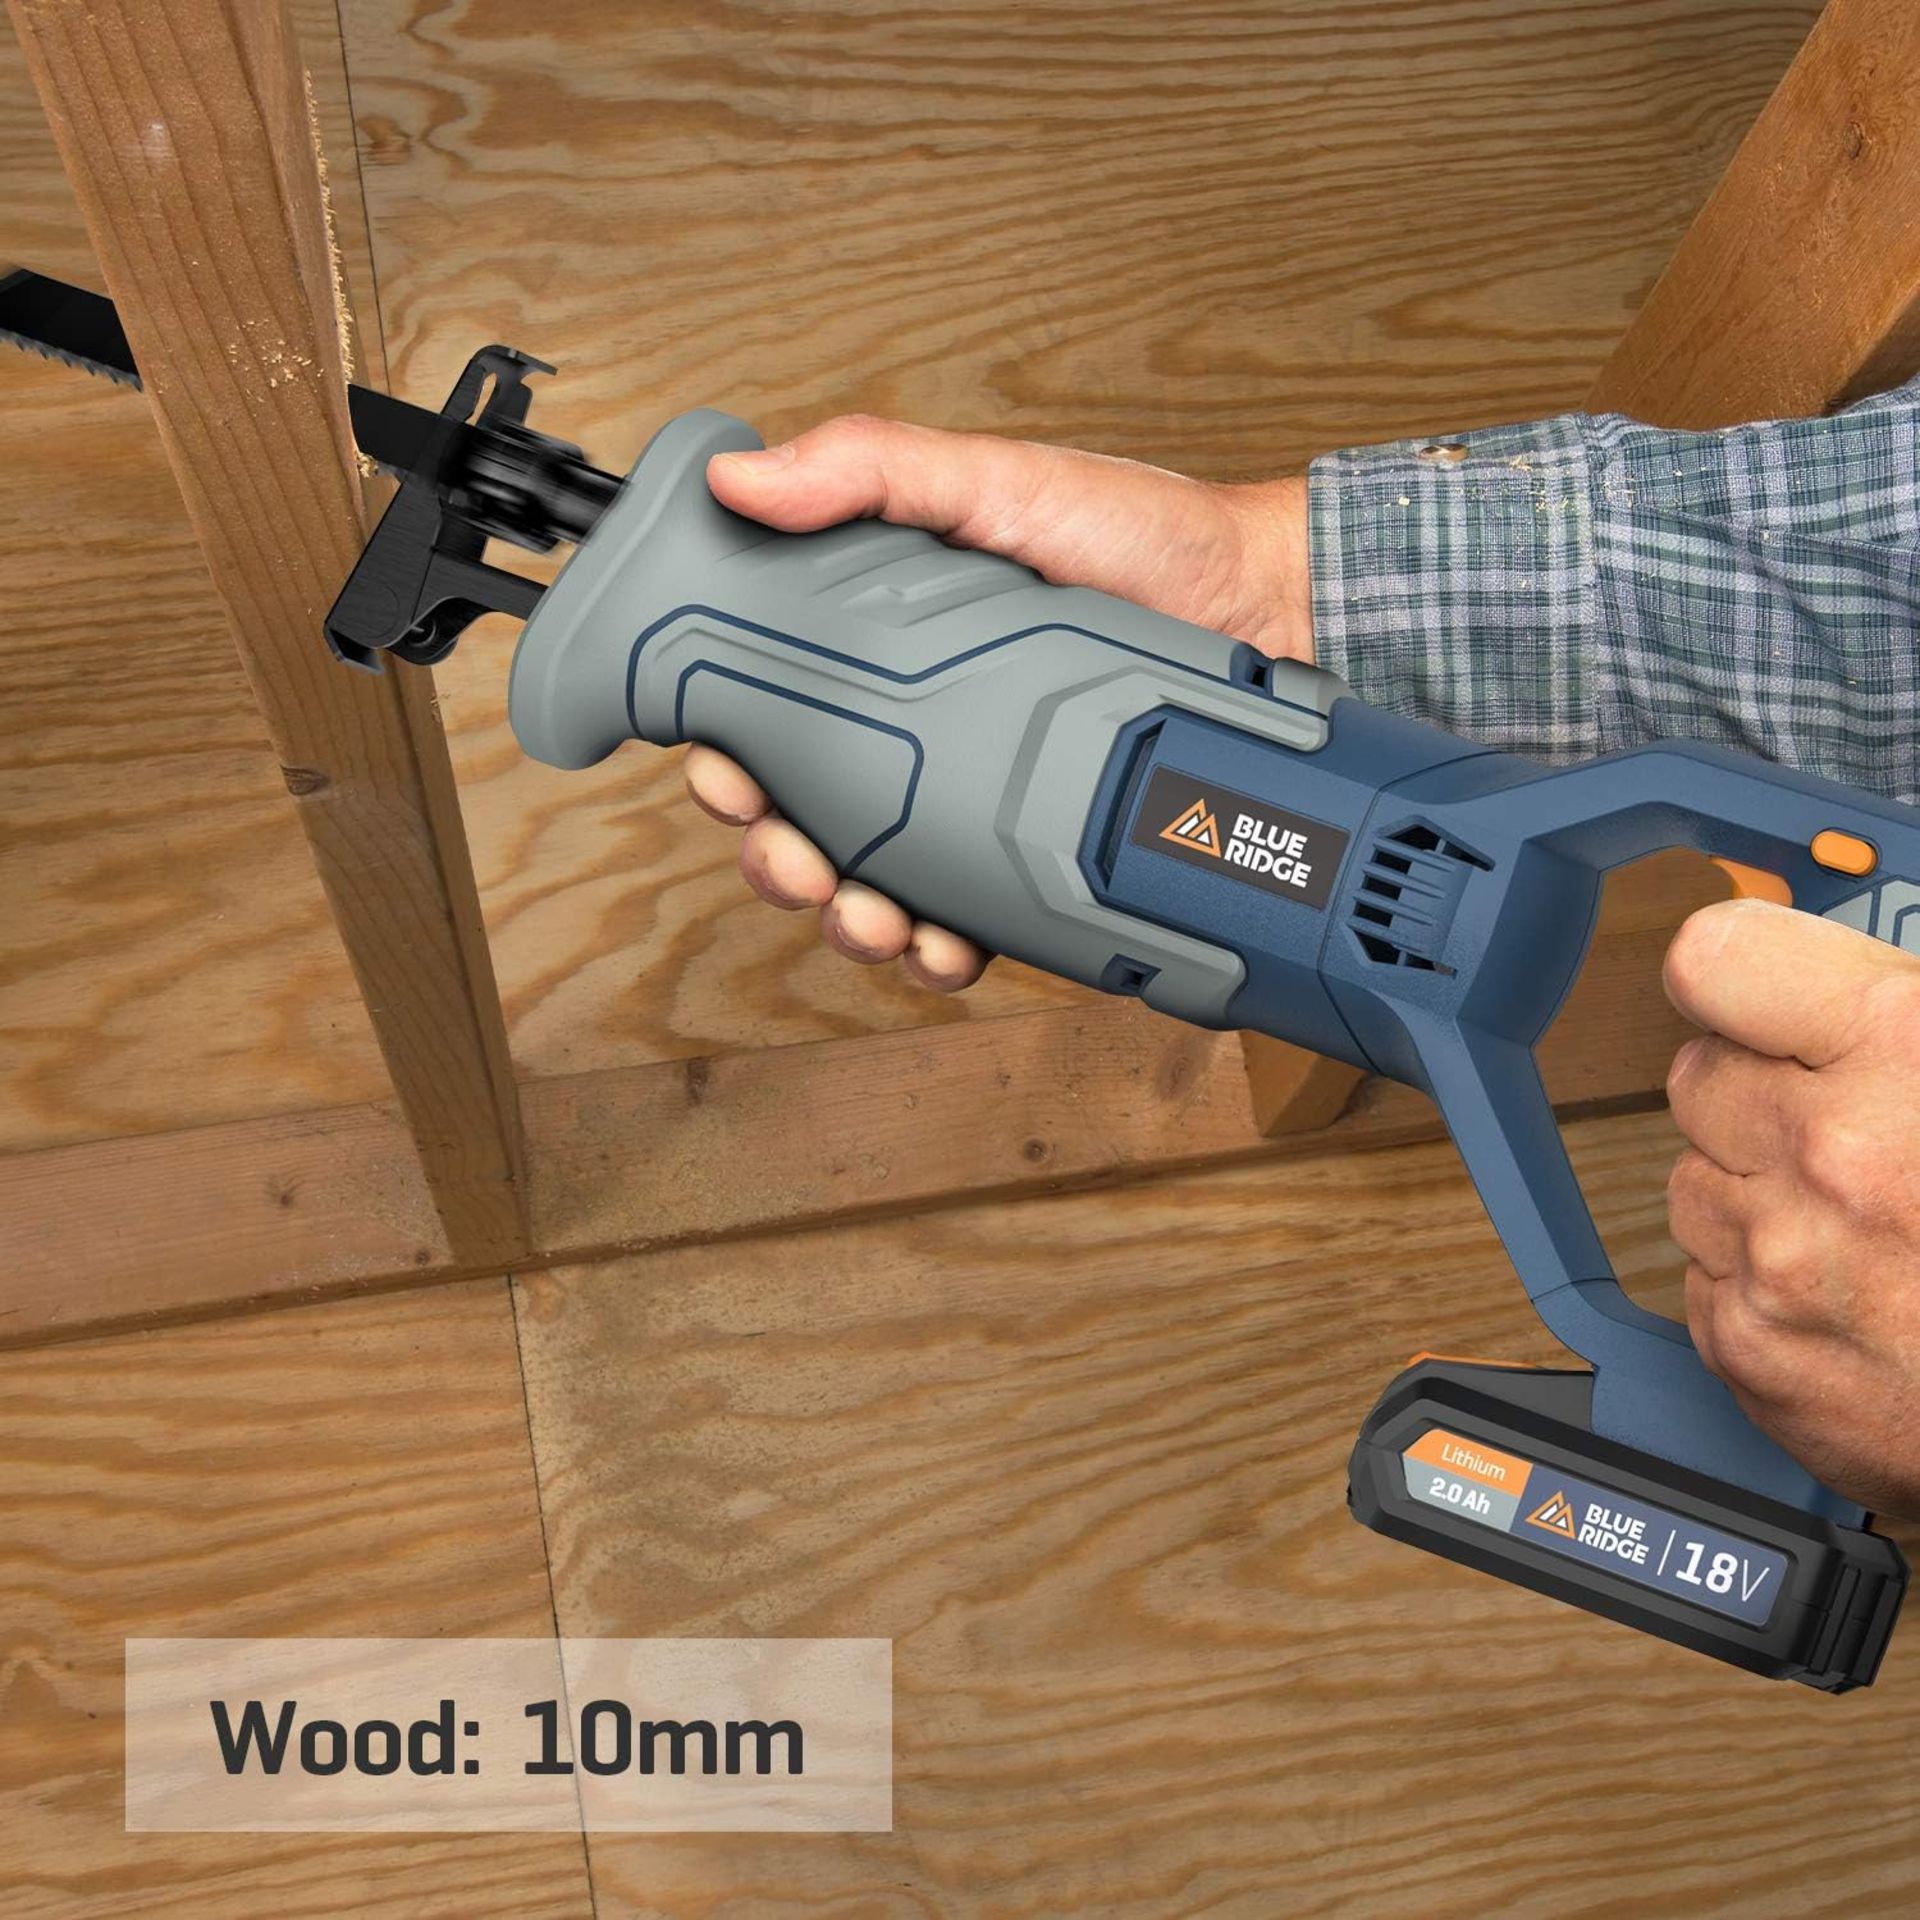 3x NEW & BOXED BLUE RIDGE 18V Reciprocating Cordless Sabre Saw with 2.0Ah Battery. RRP £99 EACH. - Image 5 of 8